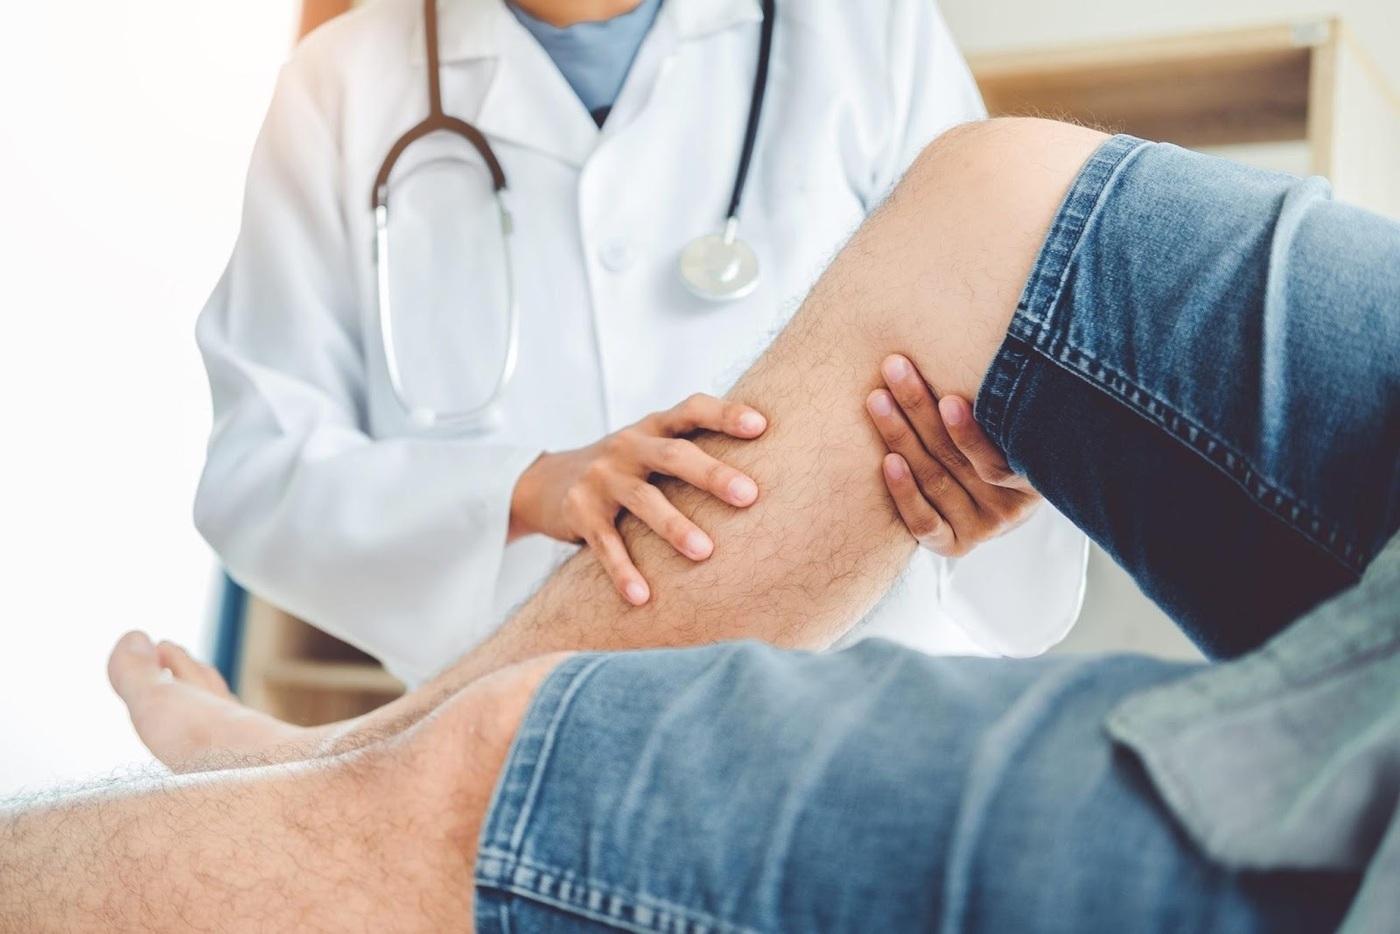 Center for Advanced Vein Care is a clinic that provides a wide range of treatments for various vein conditions.